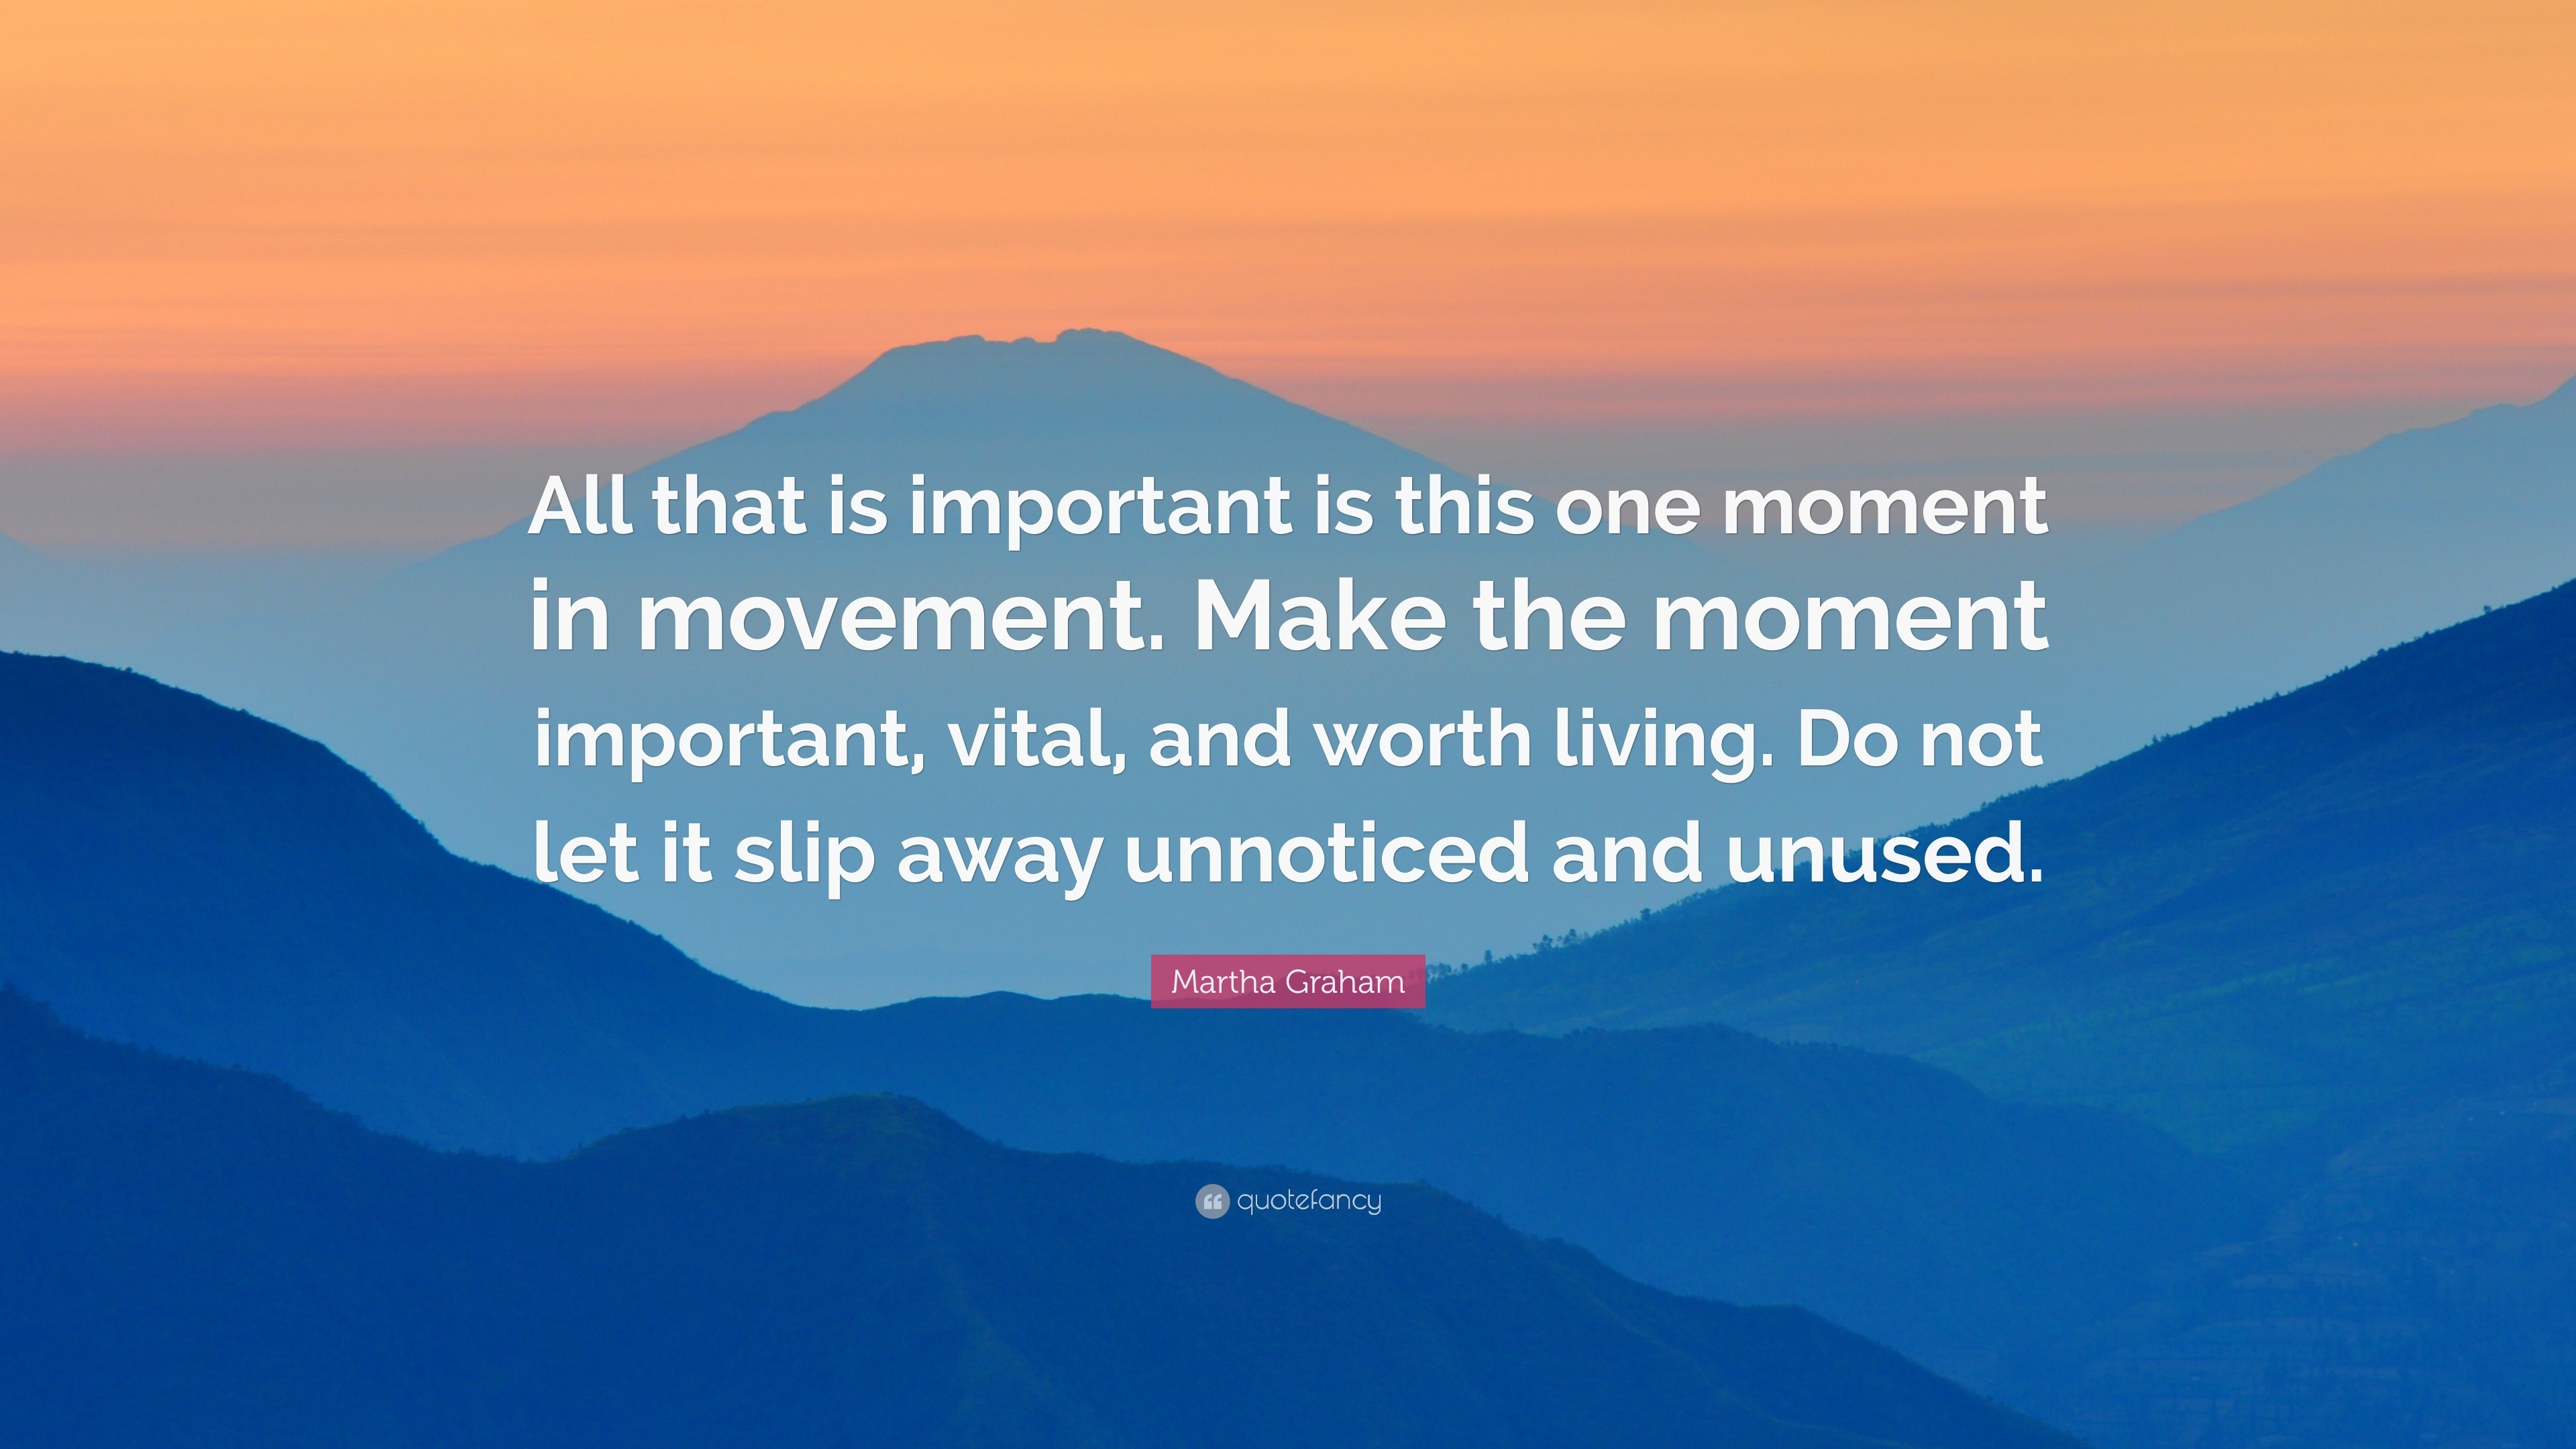 Martha Graham Quote: “All that is important is this one moment in ...